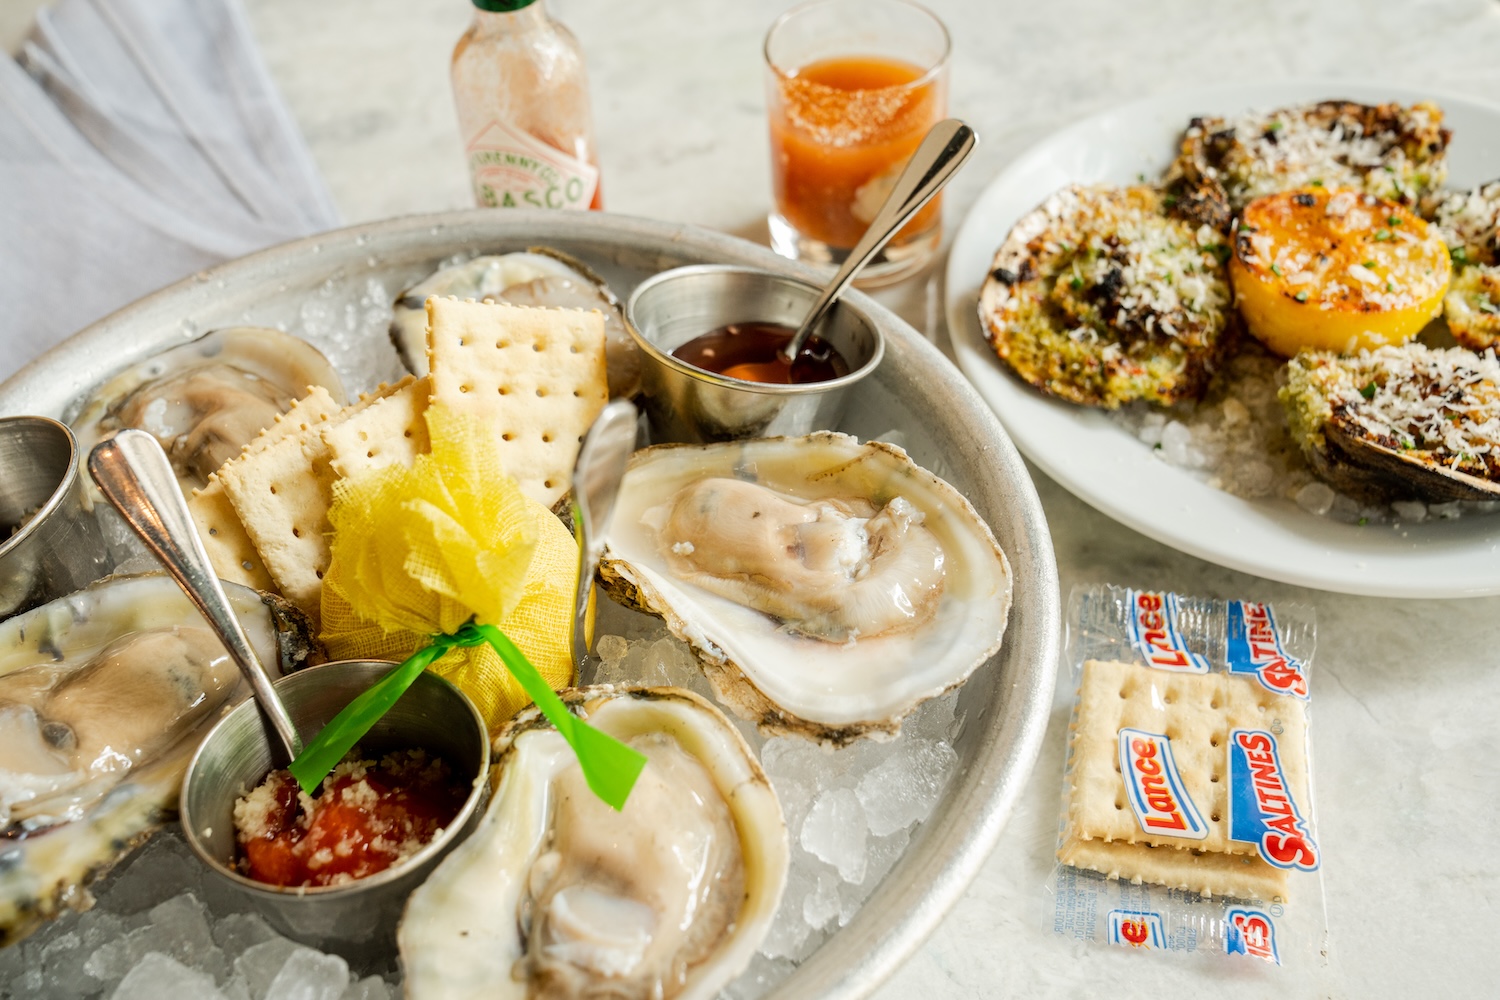 Drake Leonard's Eunice includes a raw bar stocked with fresh oysters